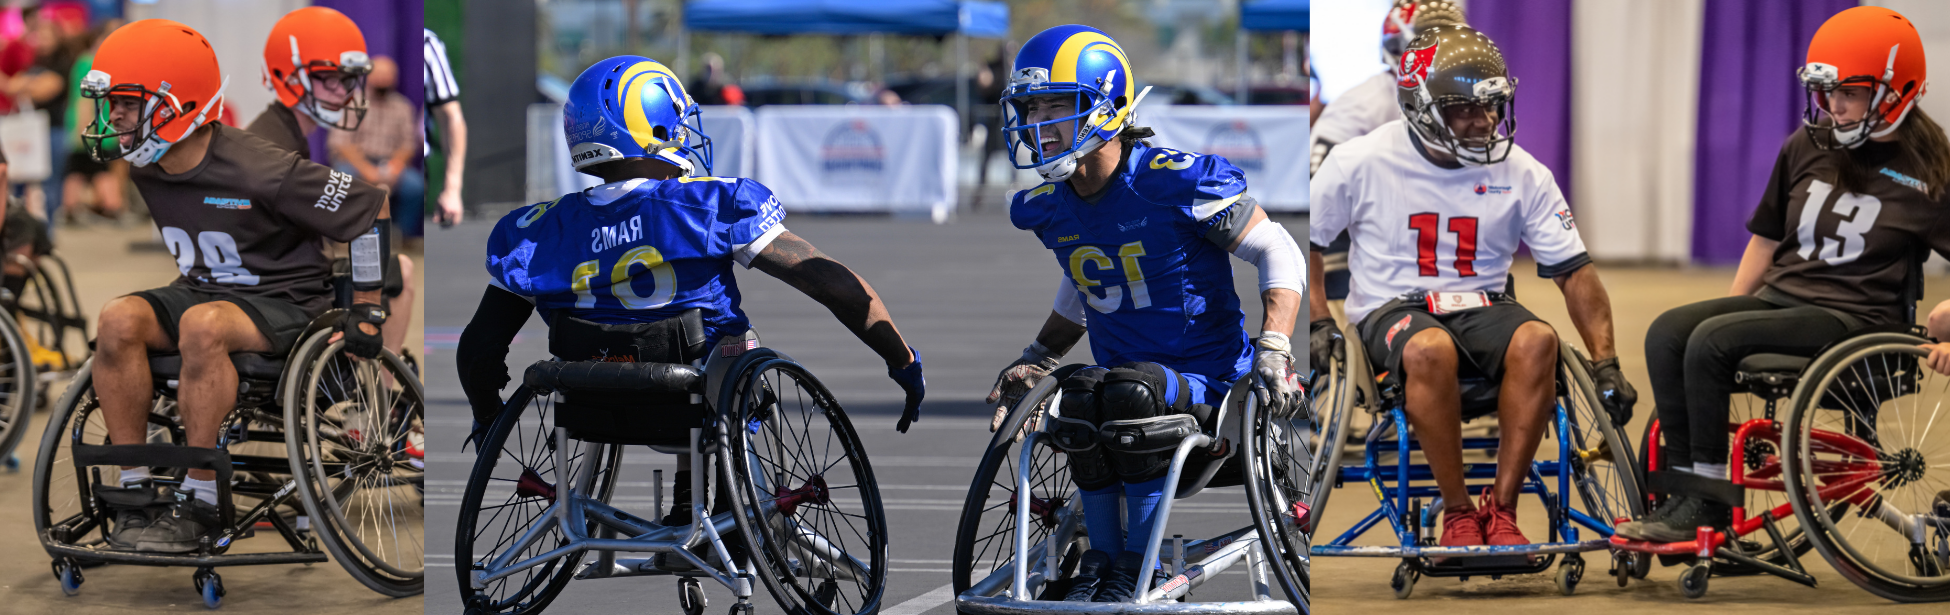 Left Image: athlete calling out to teammate Center Image: Two Teammates cheer to each other. Right image: opposing players wheelchairs hit each other.